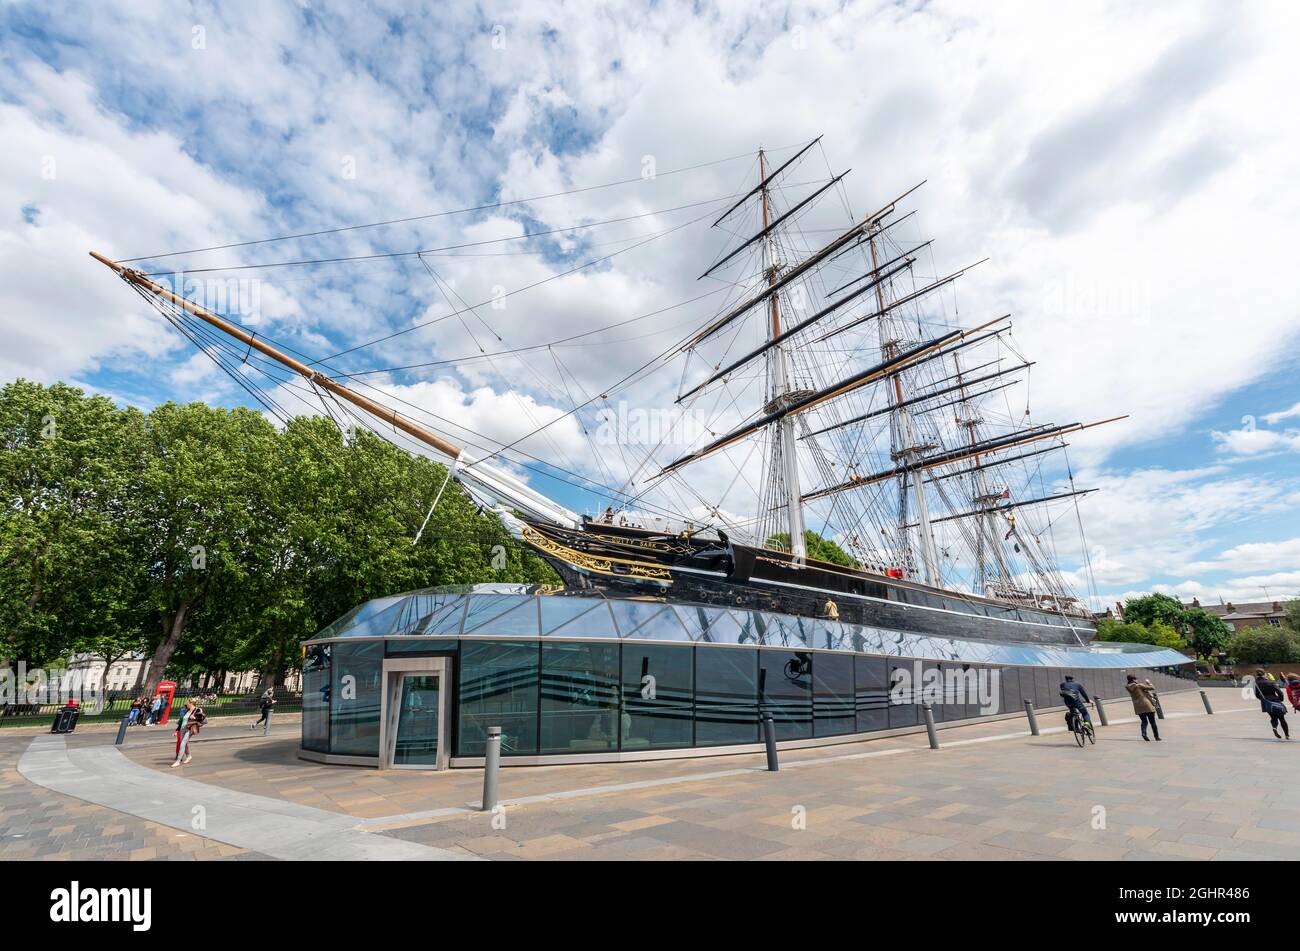 Old sailing ship, exhibition ship with museum, The Tea Clipper Cutty Sark, Greenwich, London, England, Great Britain Stock Photo